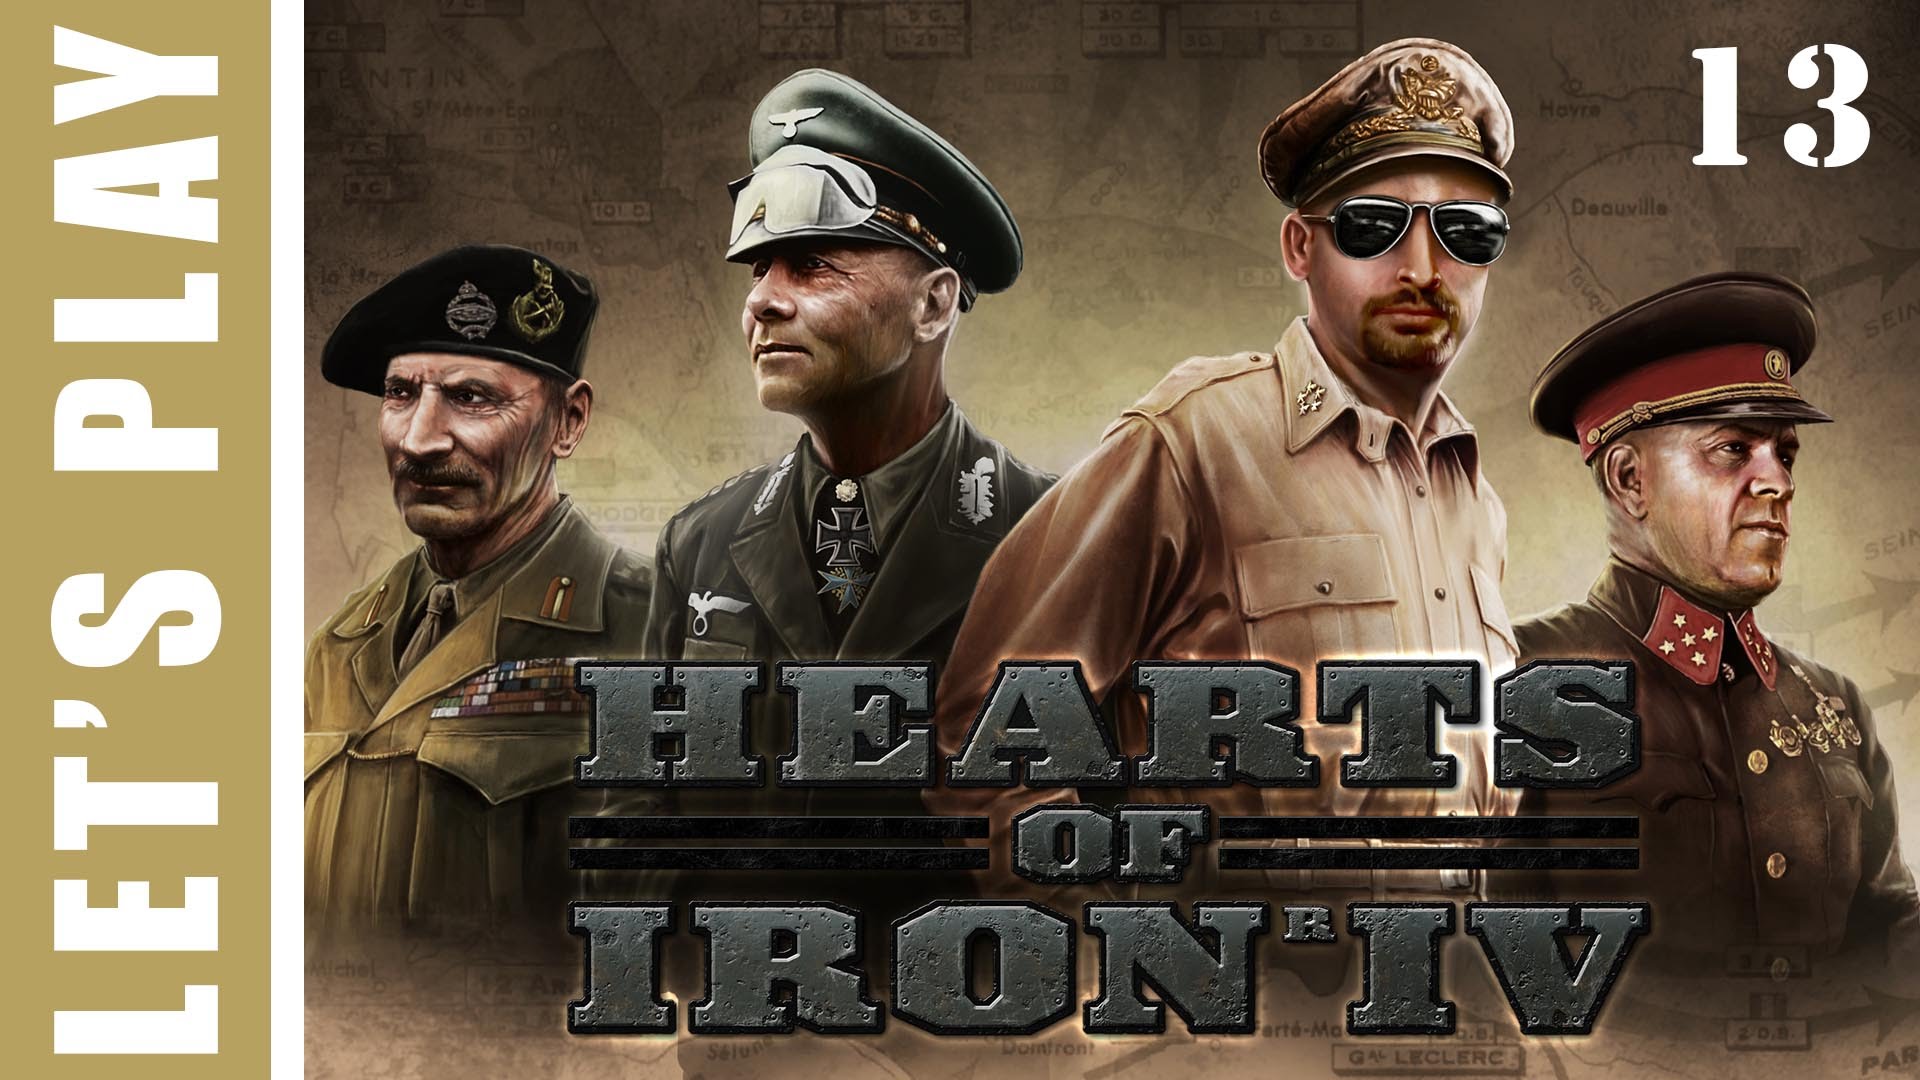 Hearts of Iron IV Germany Wins World War 2 Let’s Play 13